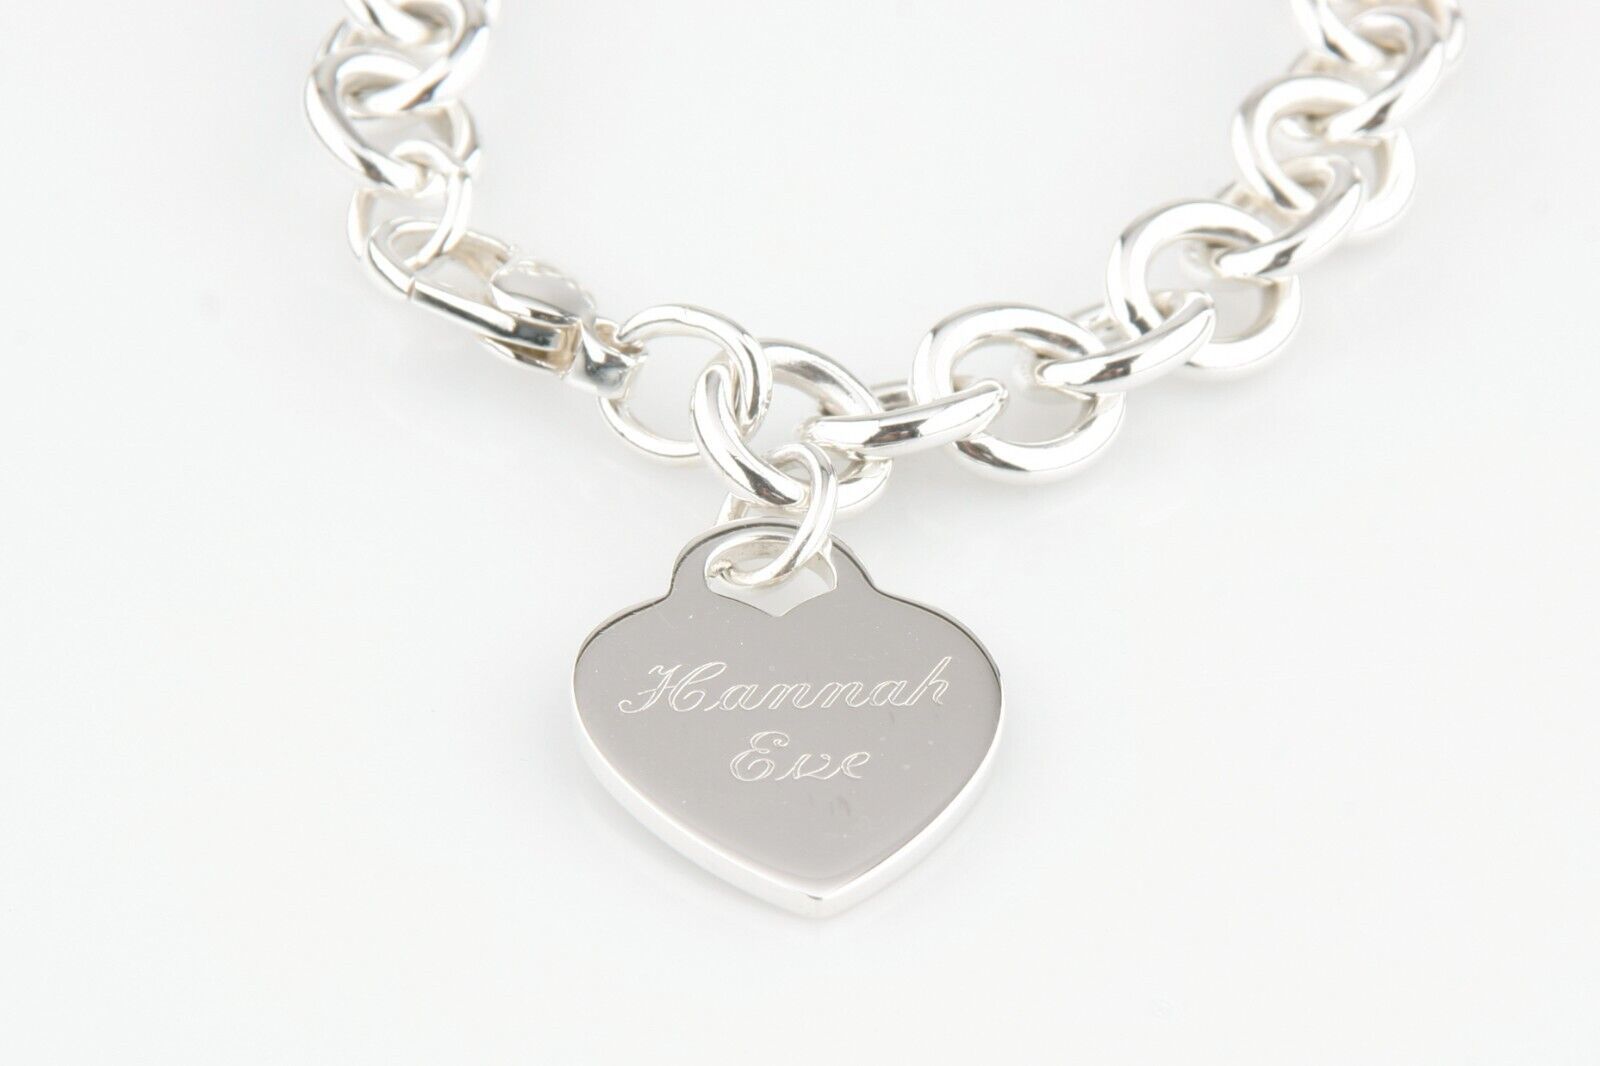 Tiffany & Co. Sterling Silver Blank Heart Tag Charm Bracelet 7.5" Engraved - $320.43